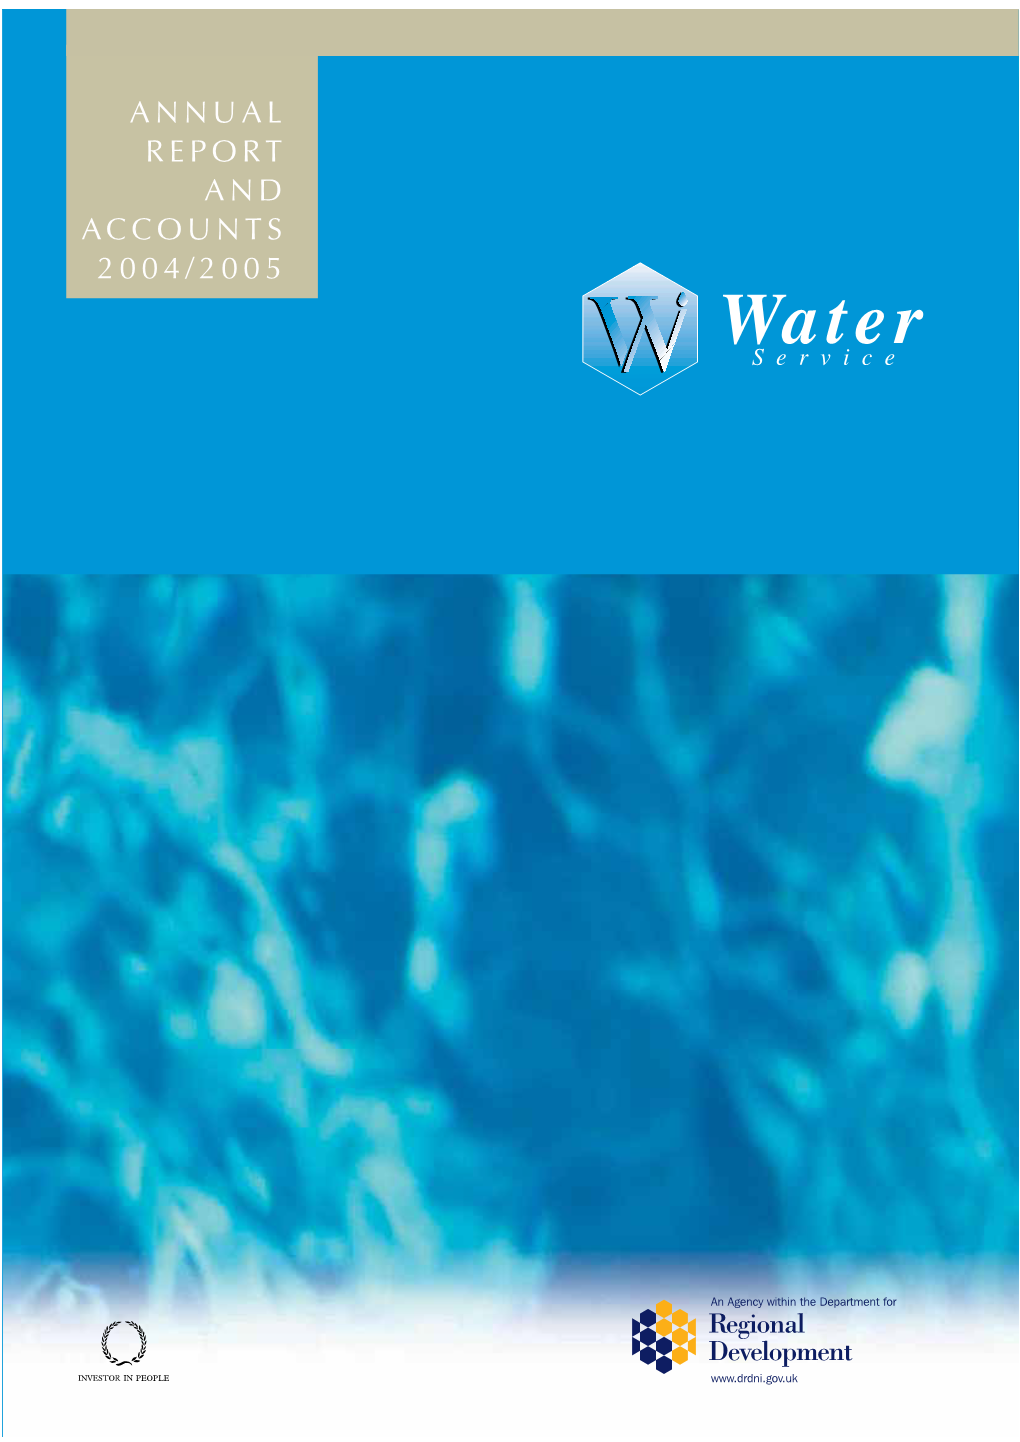 Water Service Annual Report and Accounts for the Year Ended 31 March 2005